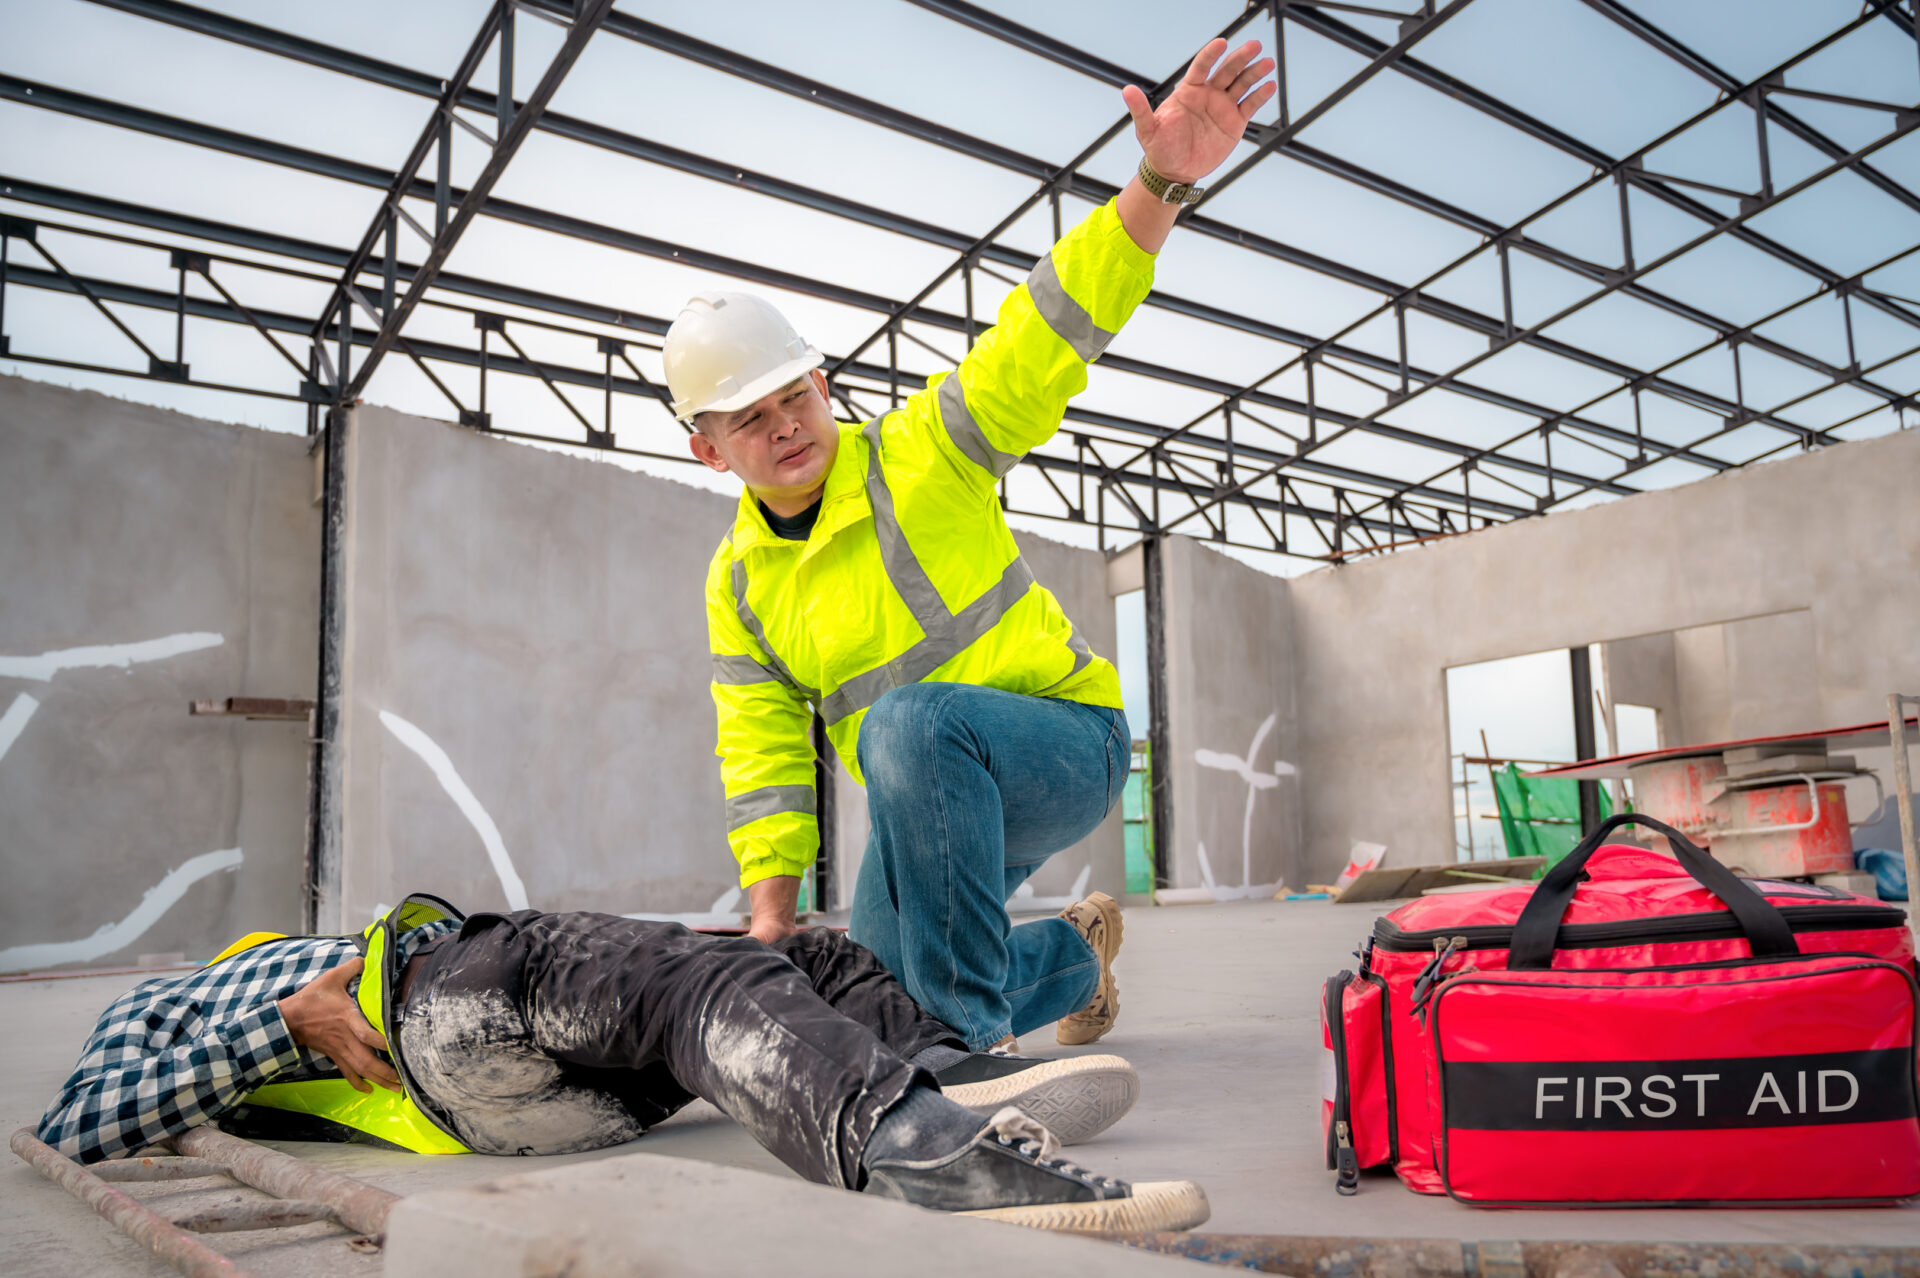 Construction accident, concerned constructor seeks immediate assistance for injured work partner lying on the floor.